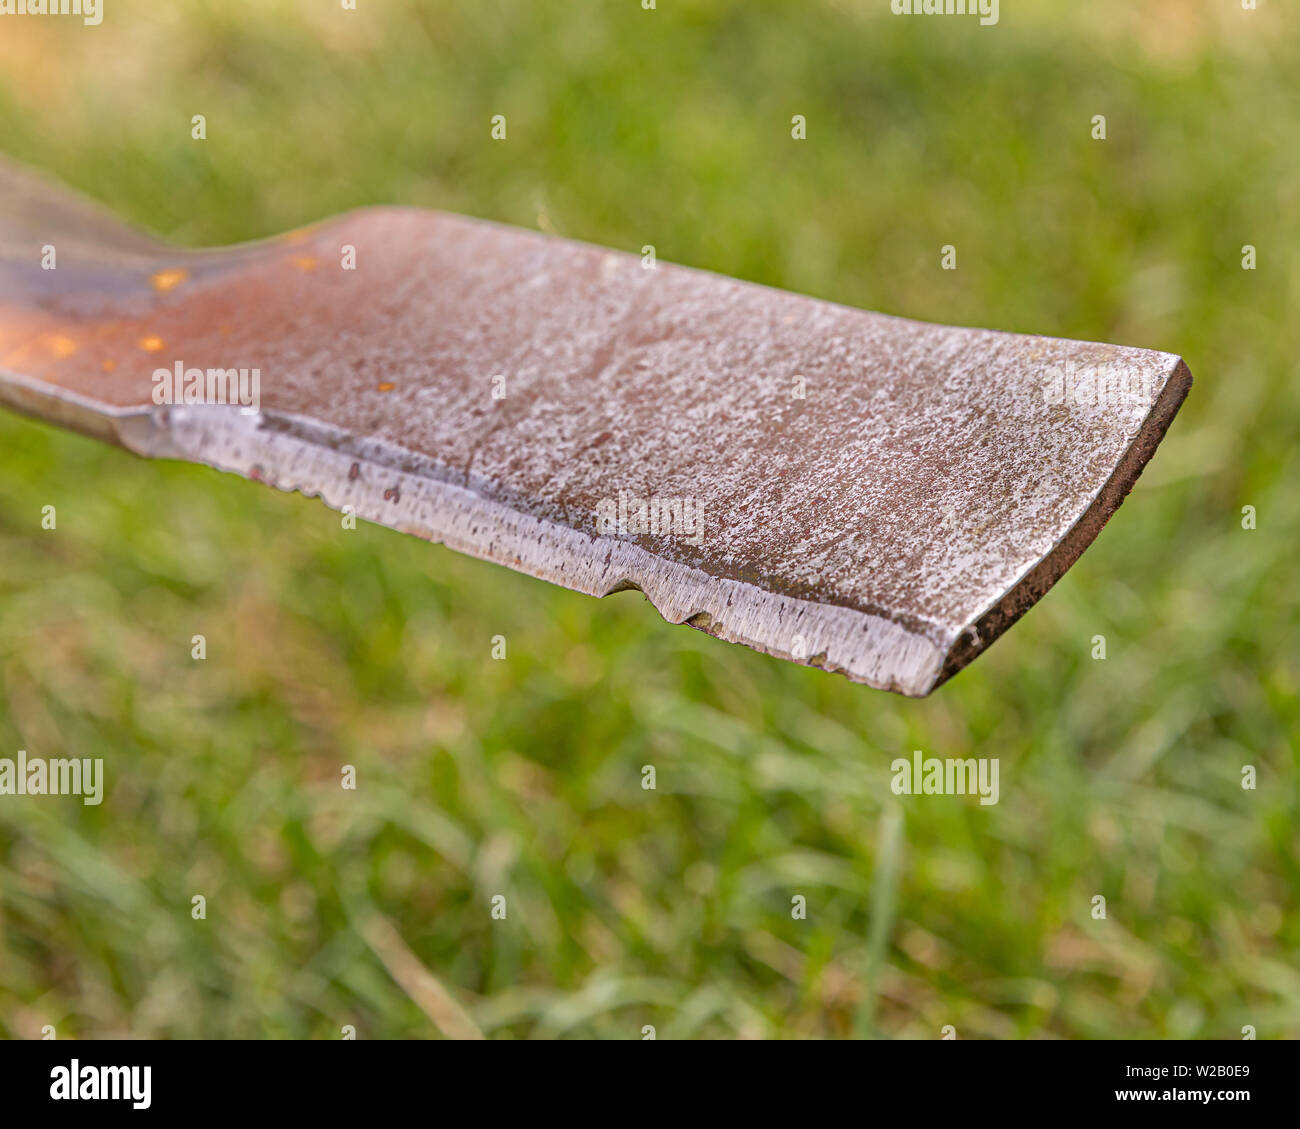 Lawn mower blade that is rusty, damaged, and dull and needing sharpened Stock Photo